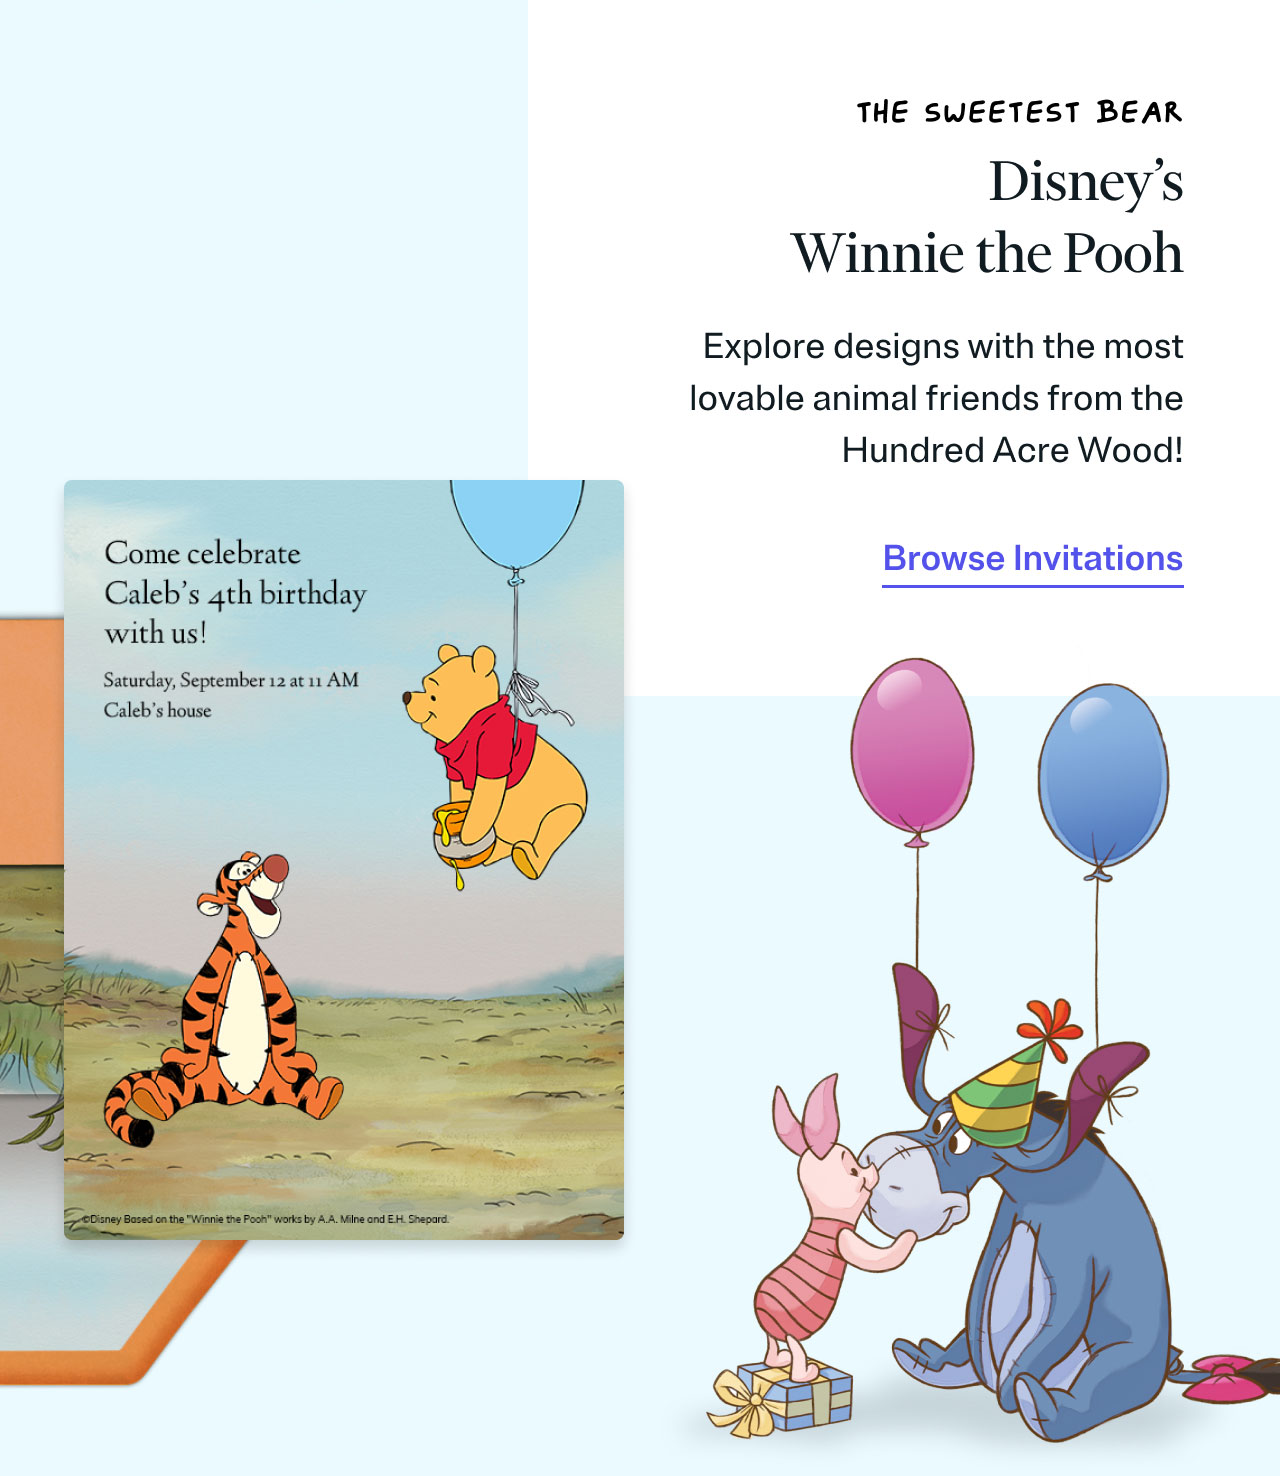 The Sweetest Bear | Disney's Winnie the Pooh | Explore designs with the most lovable animal friends from the Hundred Acre Wood!